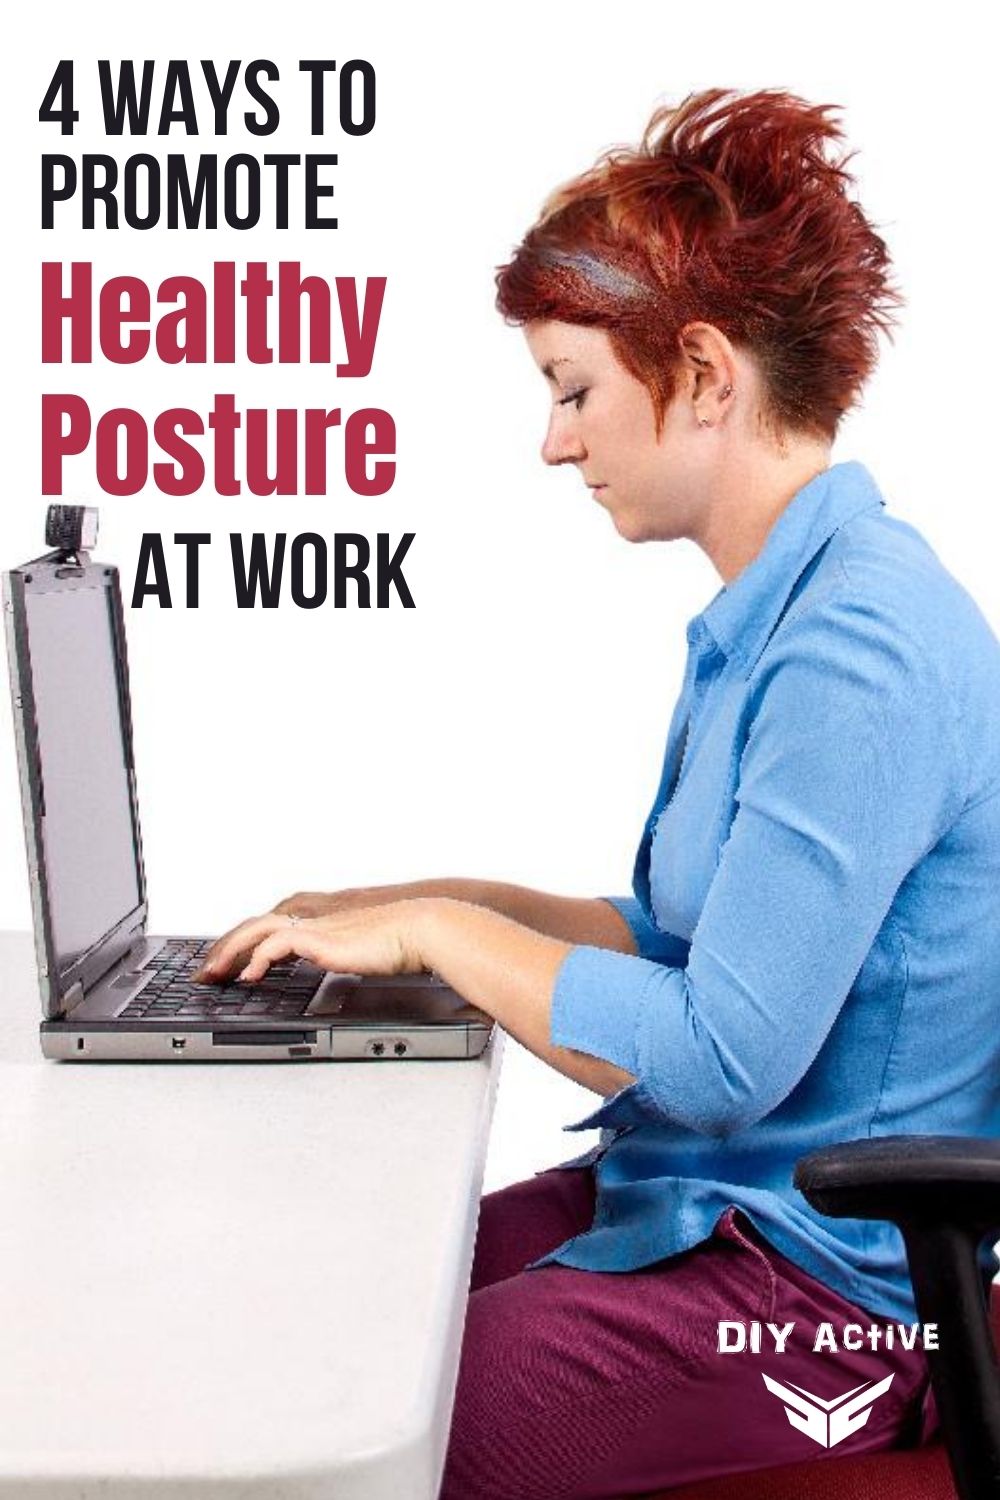 4 Ways to Promote Healthy Posture At Work